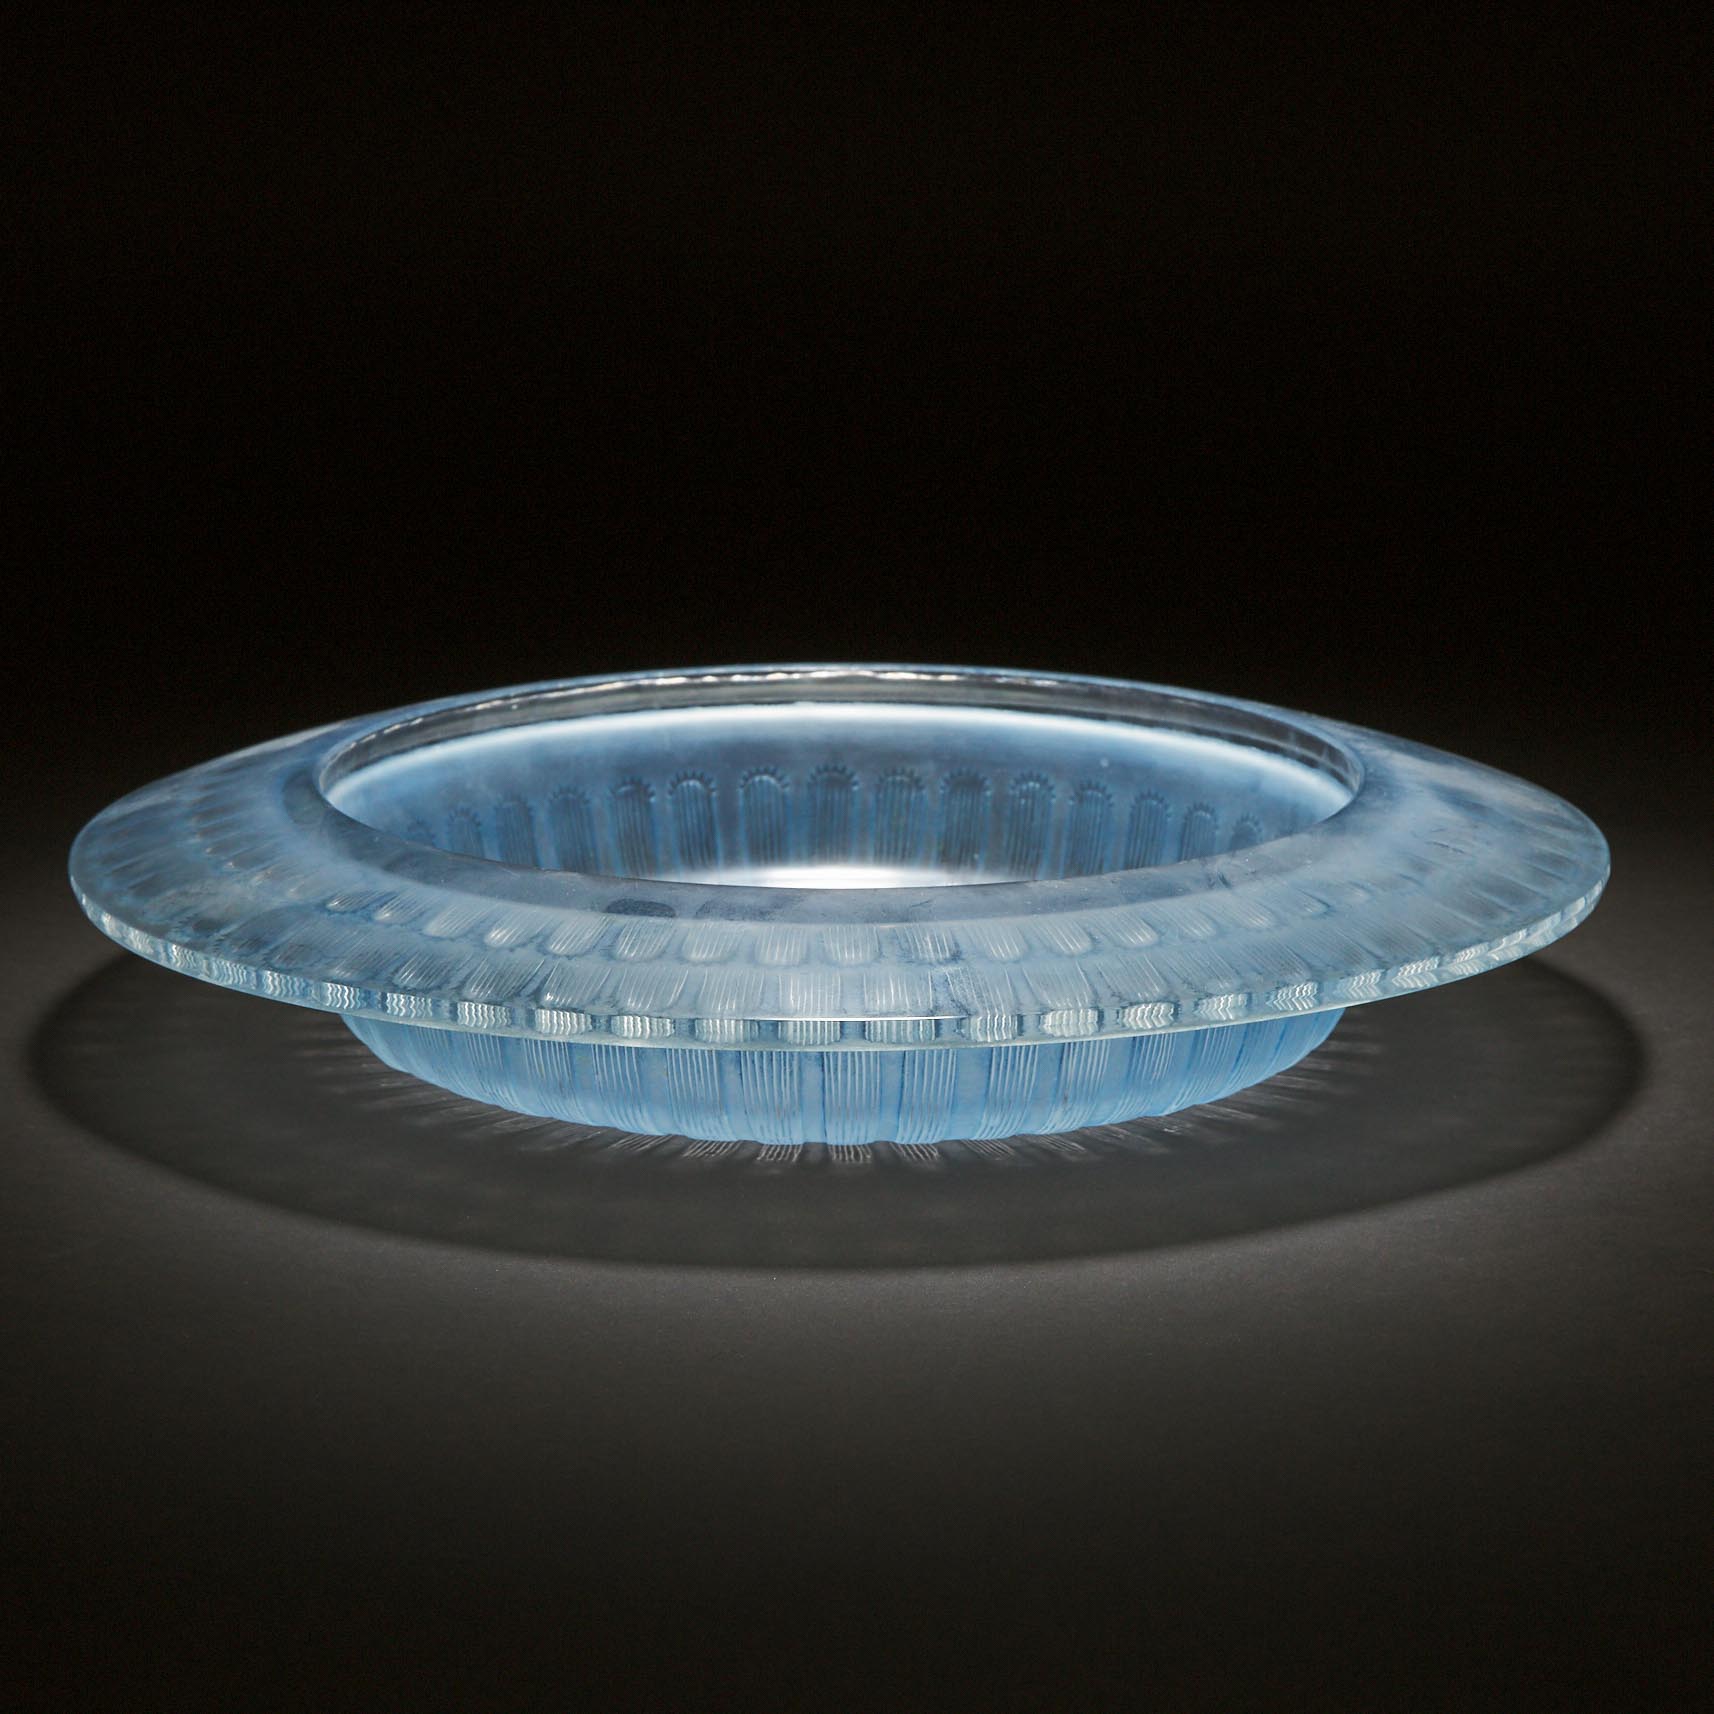 'Hélianthe', Lalique Moulded, Frosted and Blue Enameled Glass Shallow Bowl, 1930s